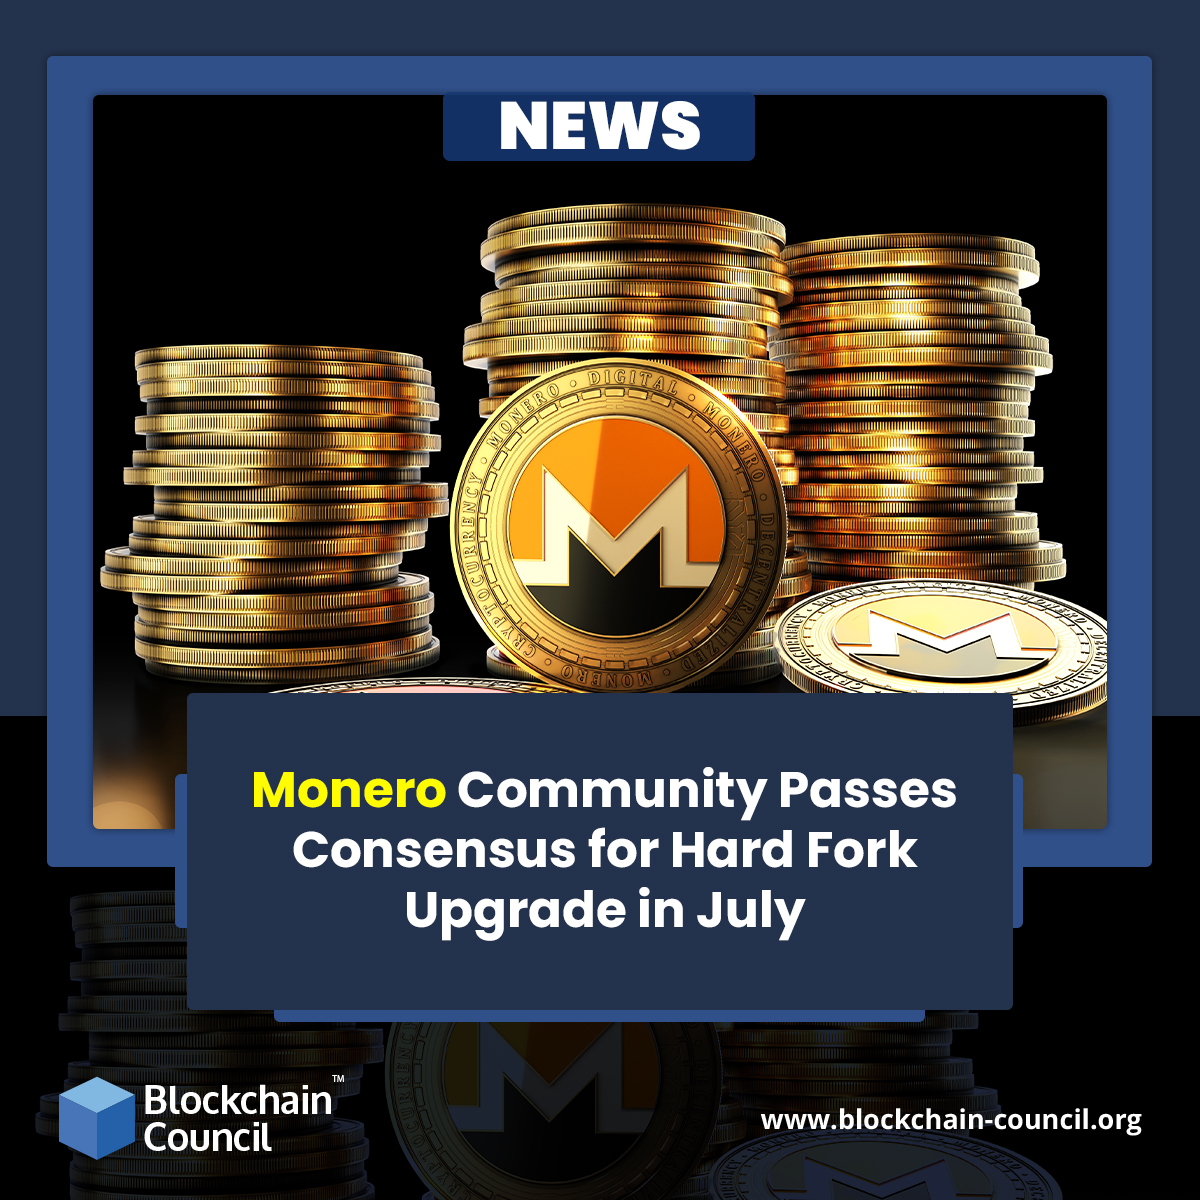 Monero Community Passes Consensus for Hard Fork Upgrade in July